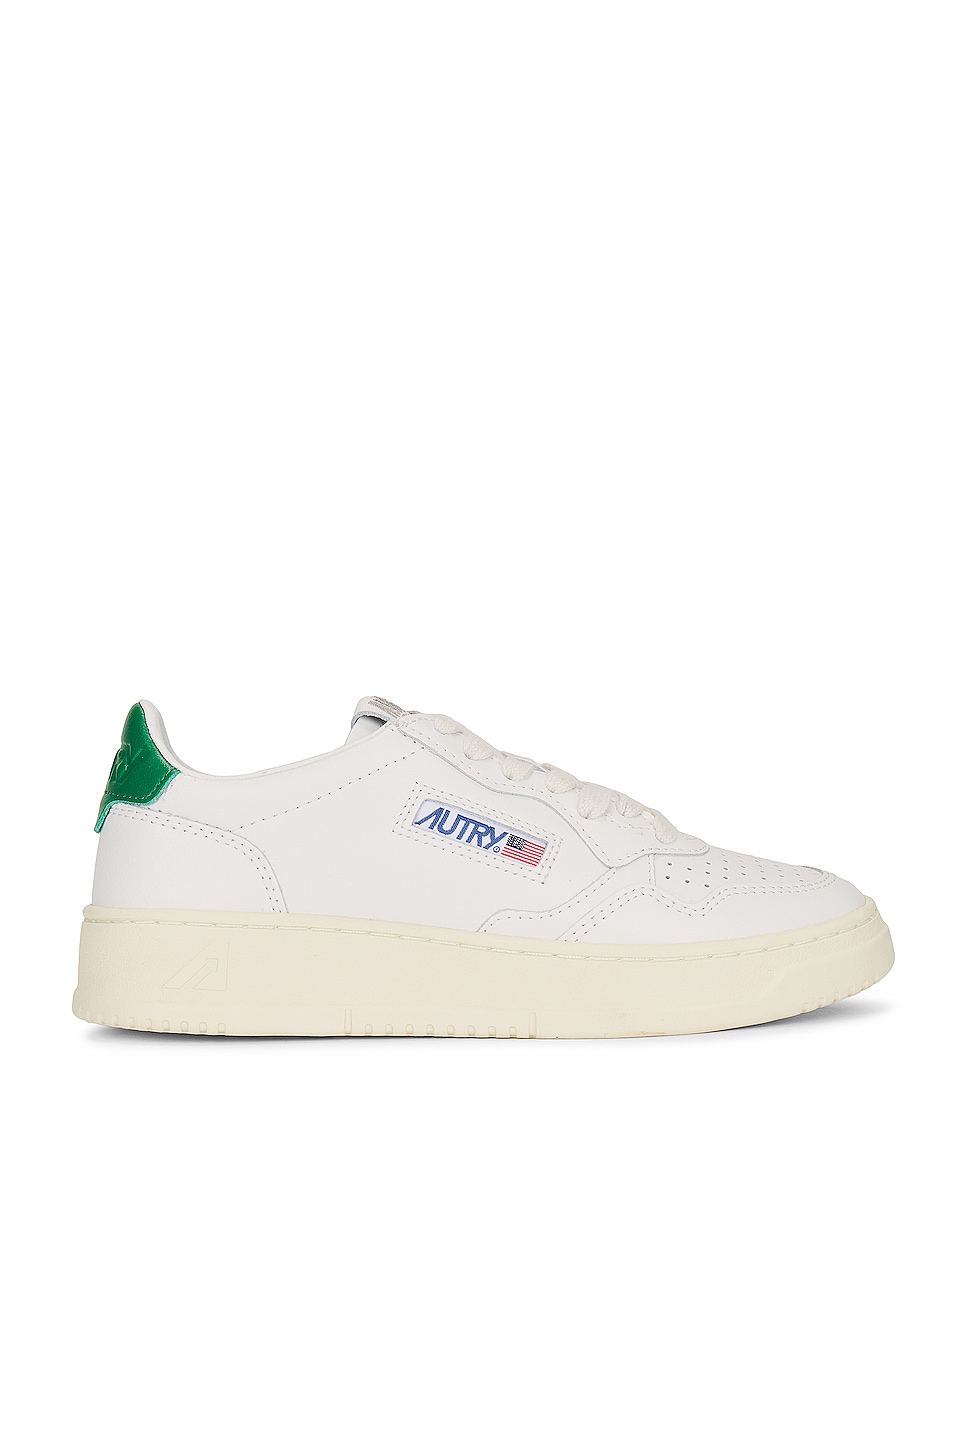 Image 1 of Autry Medalist Low Sneaker in Leather White & Green